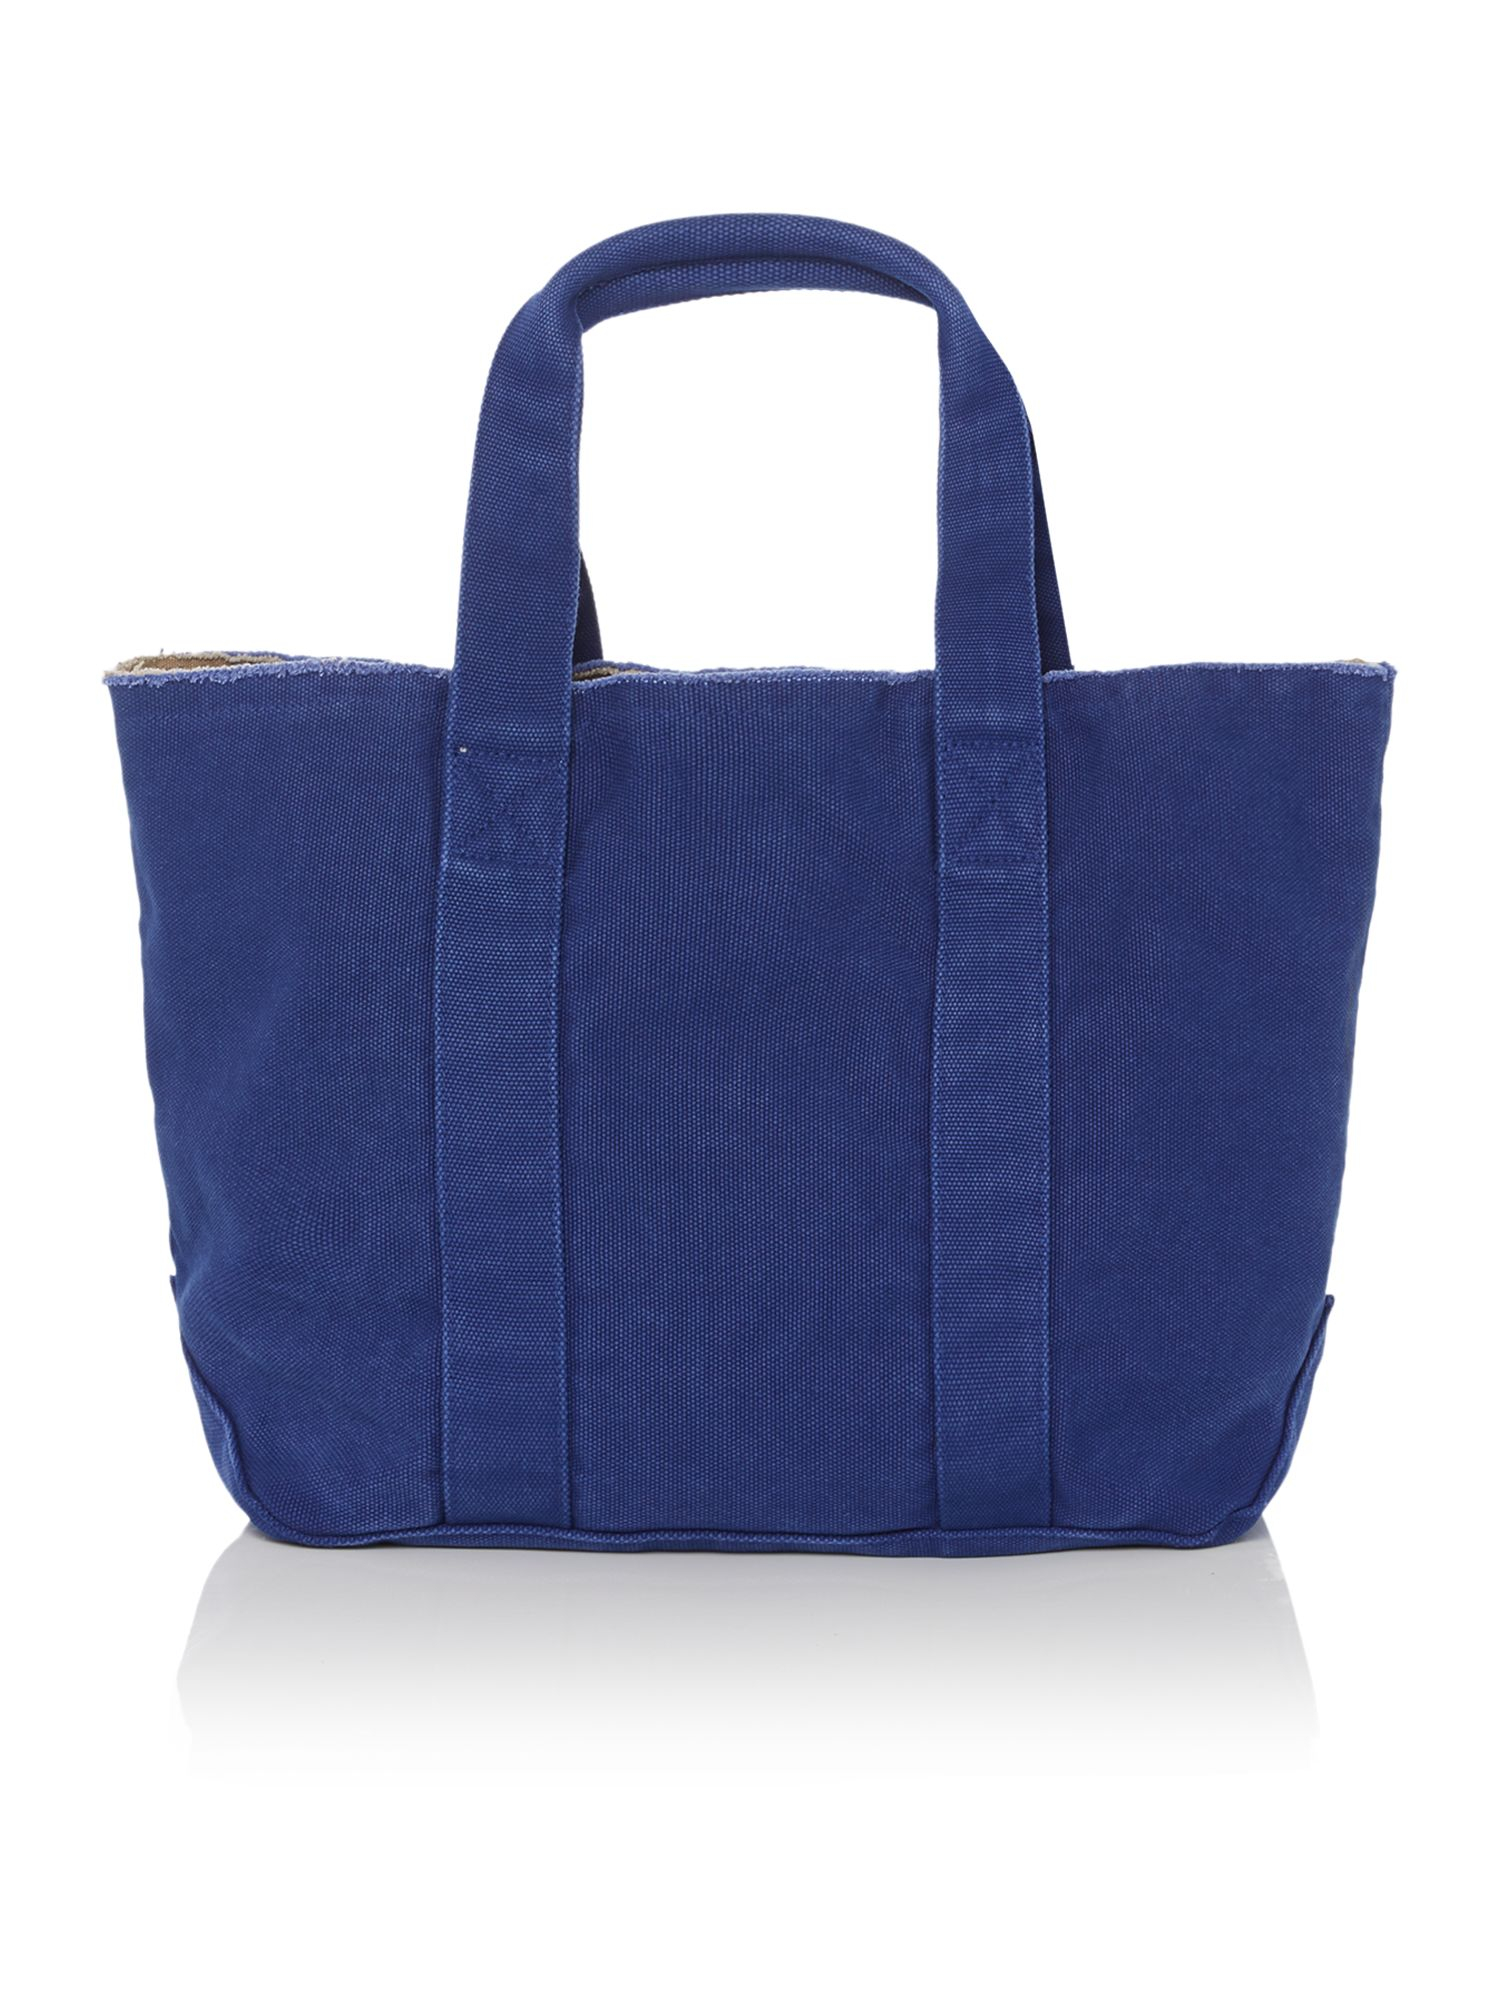 Polo ralph lauren Canvas Tote Bag in Blue | Lyst